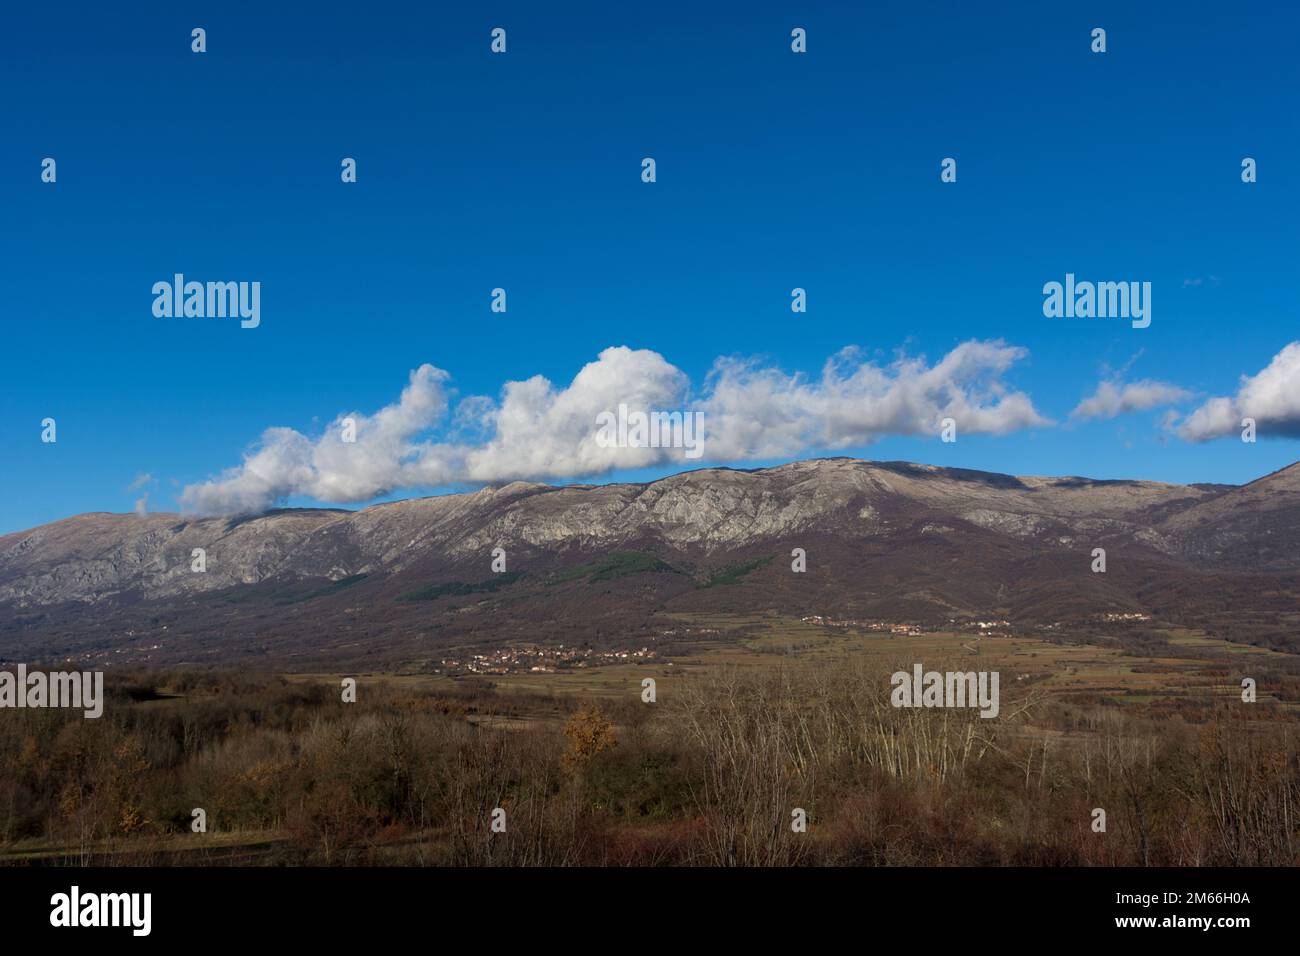 Stunning landscape view of Suva Planina, featuring the entire mountain and the surrounding autumn forest on a sunny day Stock Photo